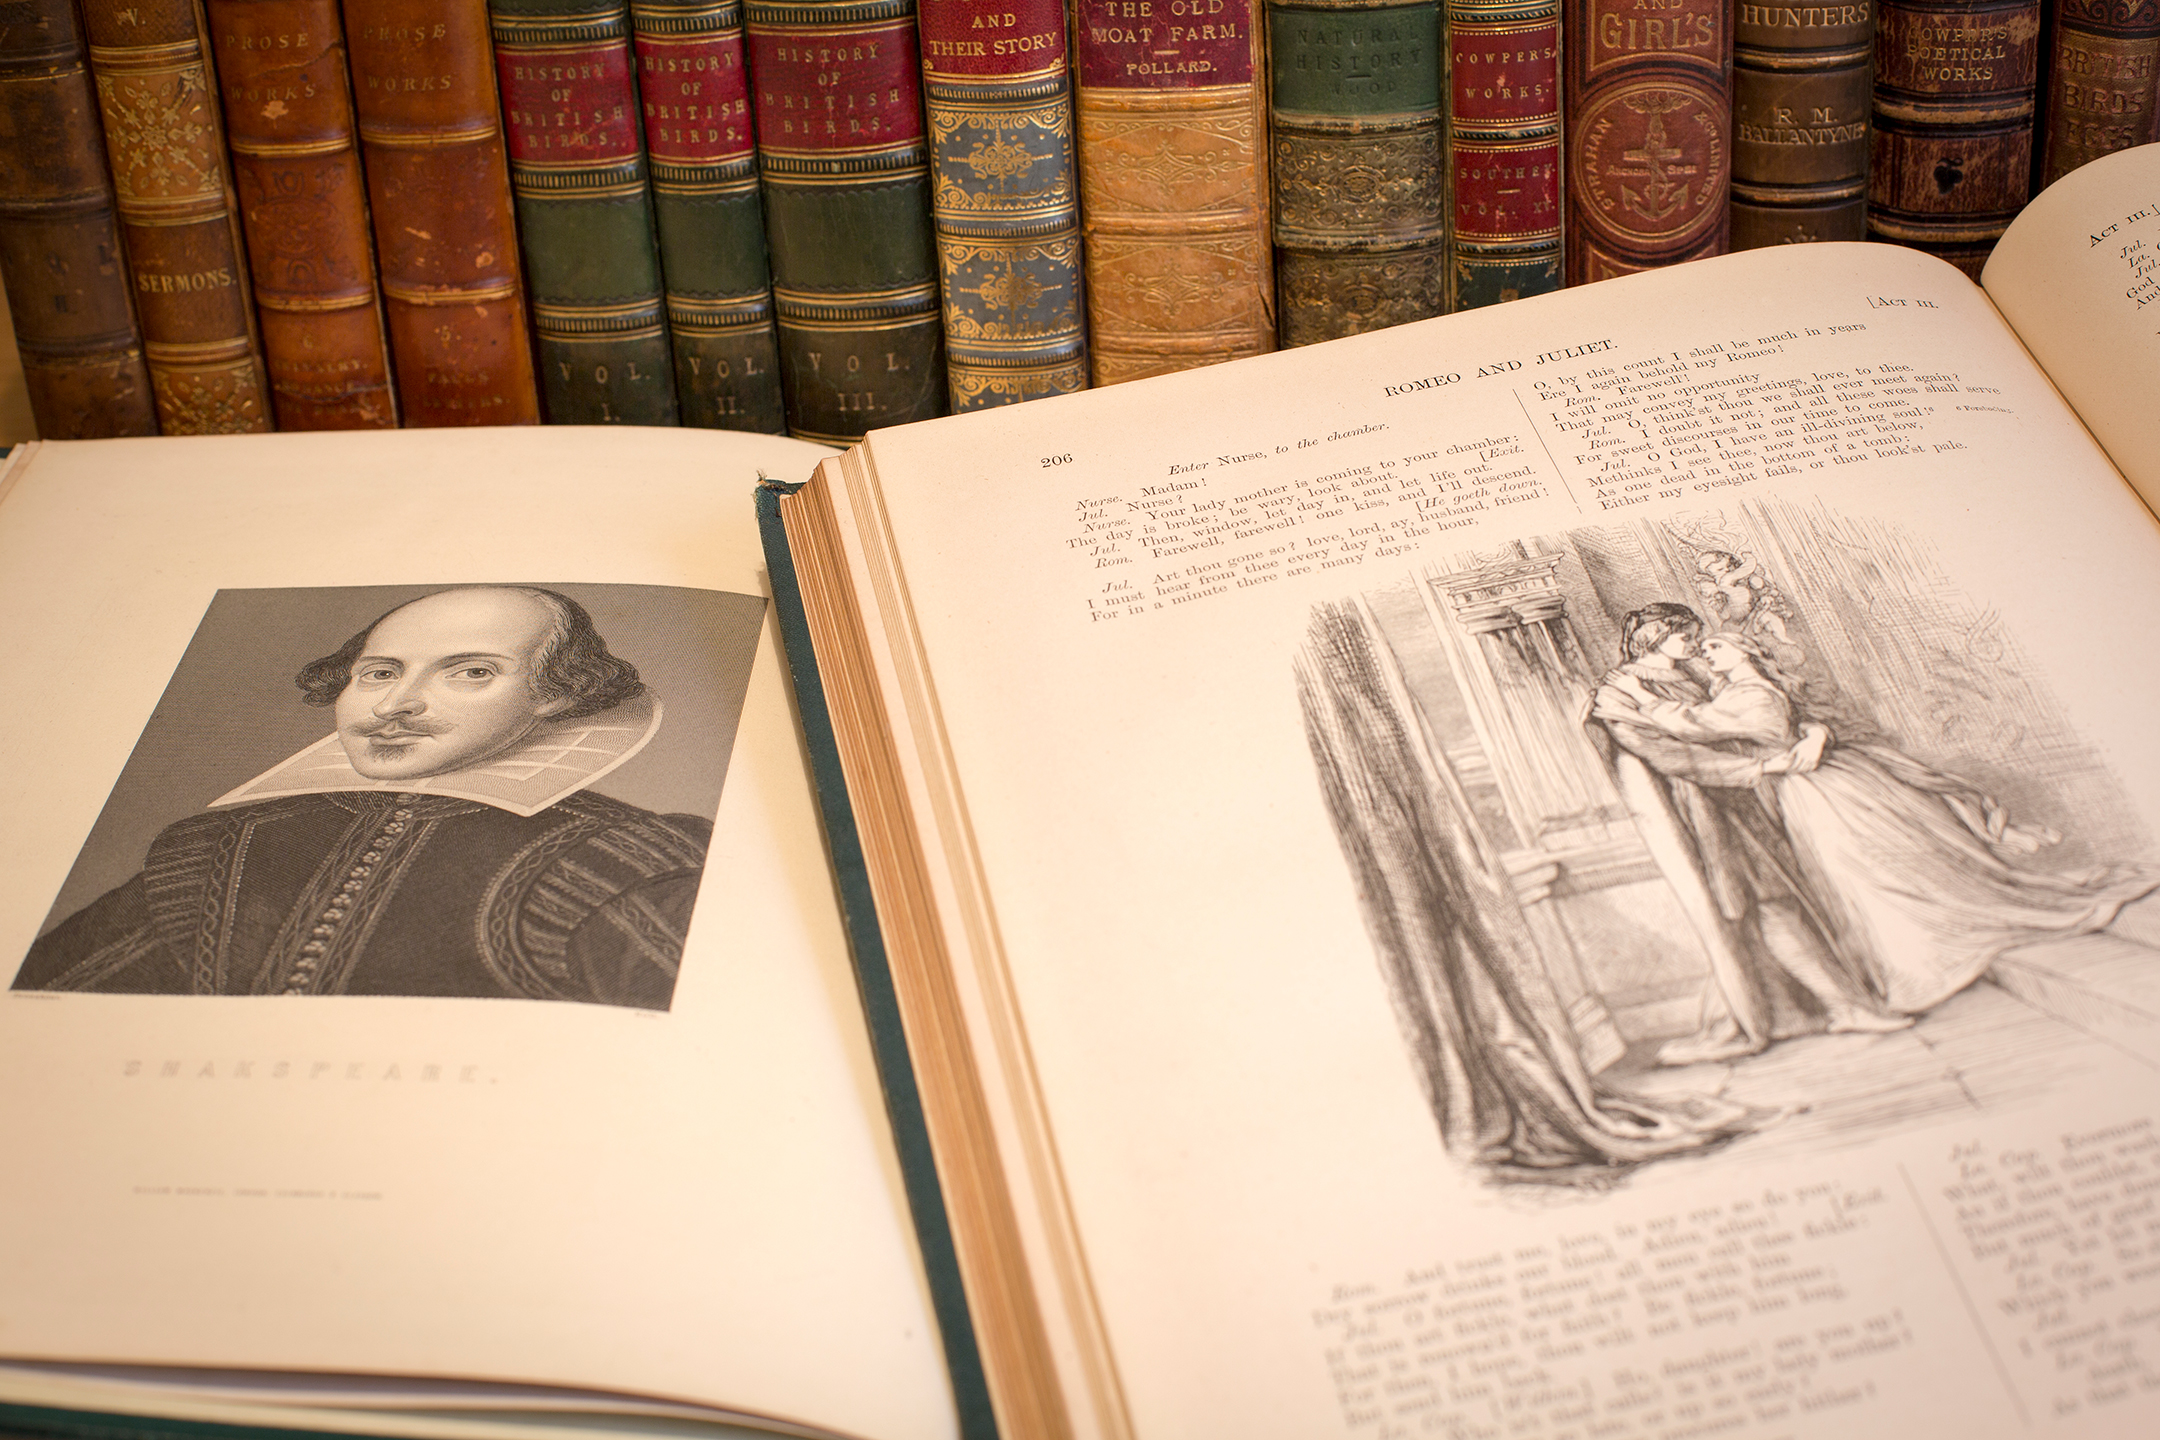 two old editions of shakespeare works lie open in front of a book shelf of old leather-bound books